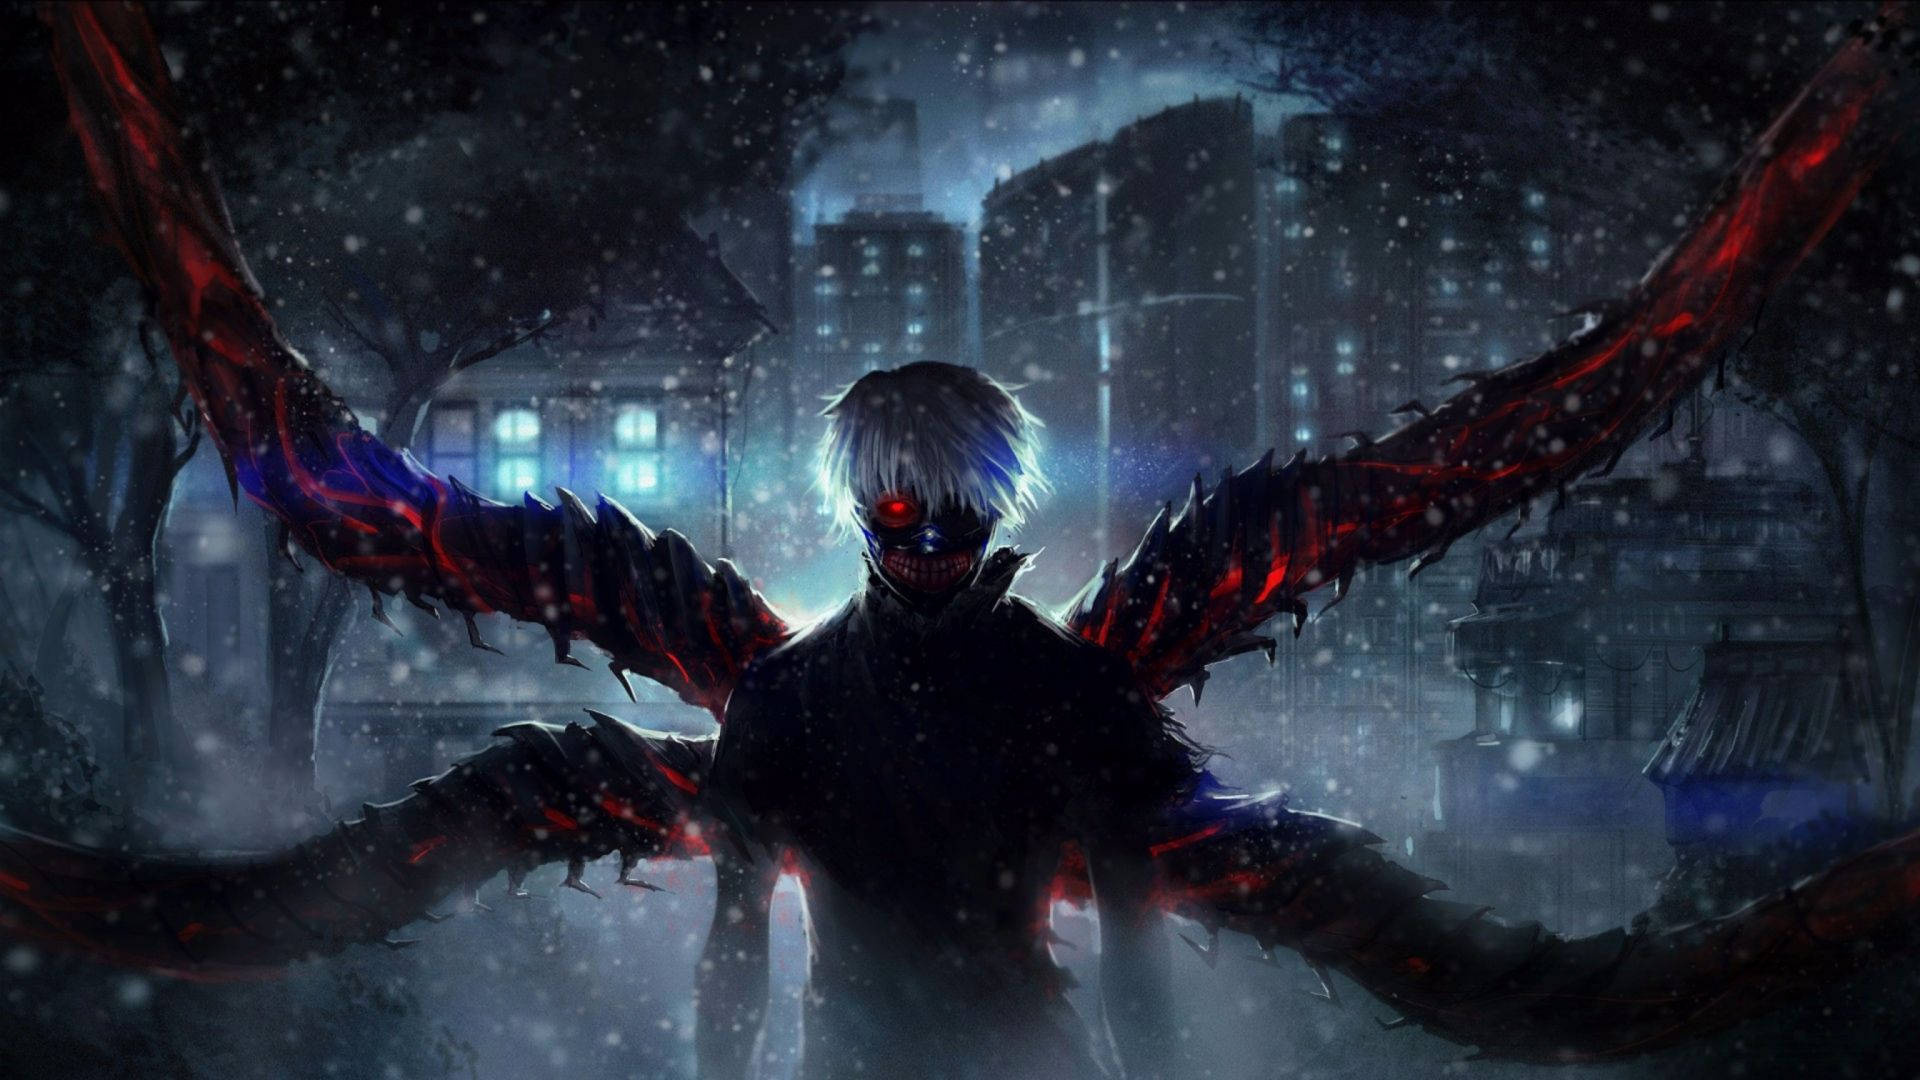 Download Intense and thoughtful dark anime boy Wallpaper